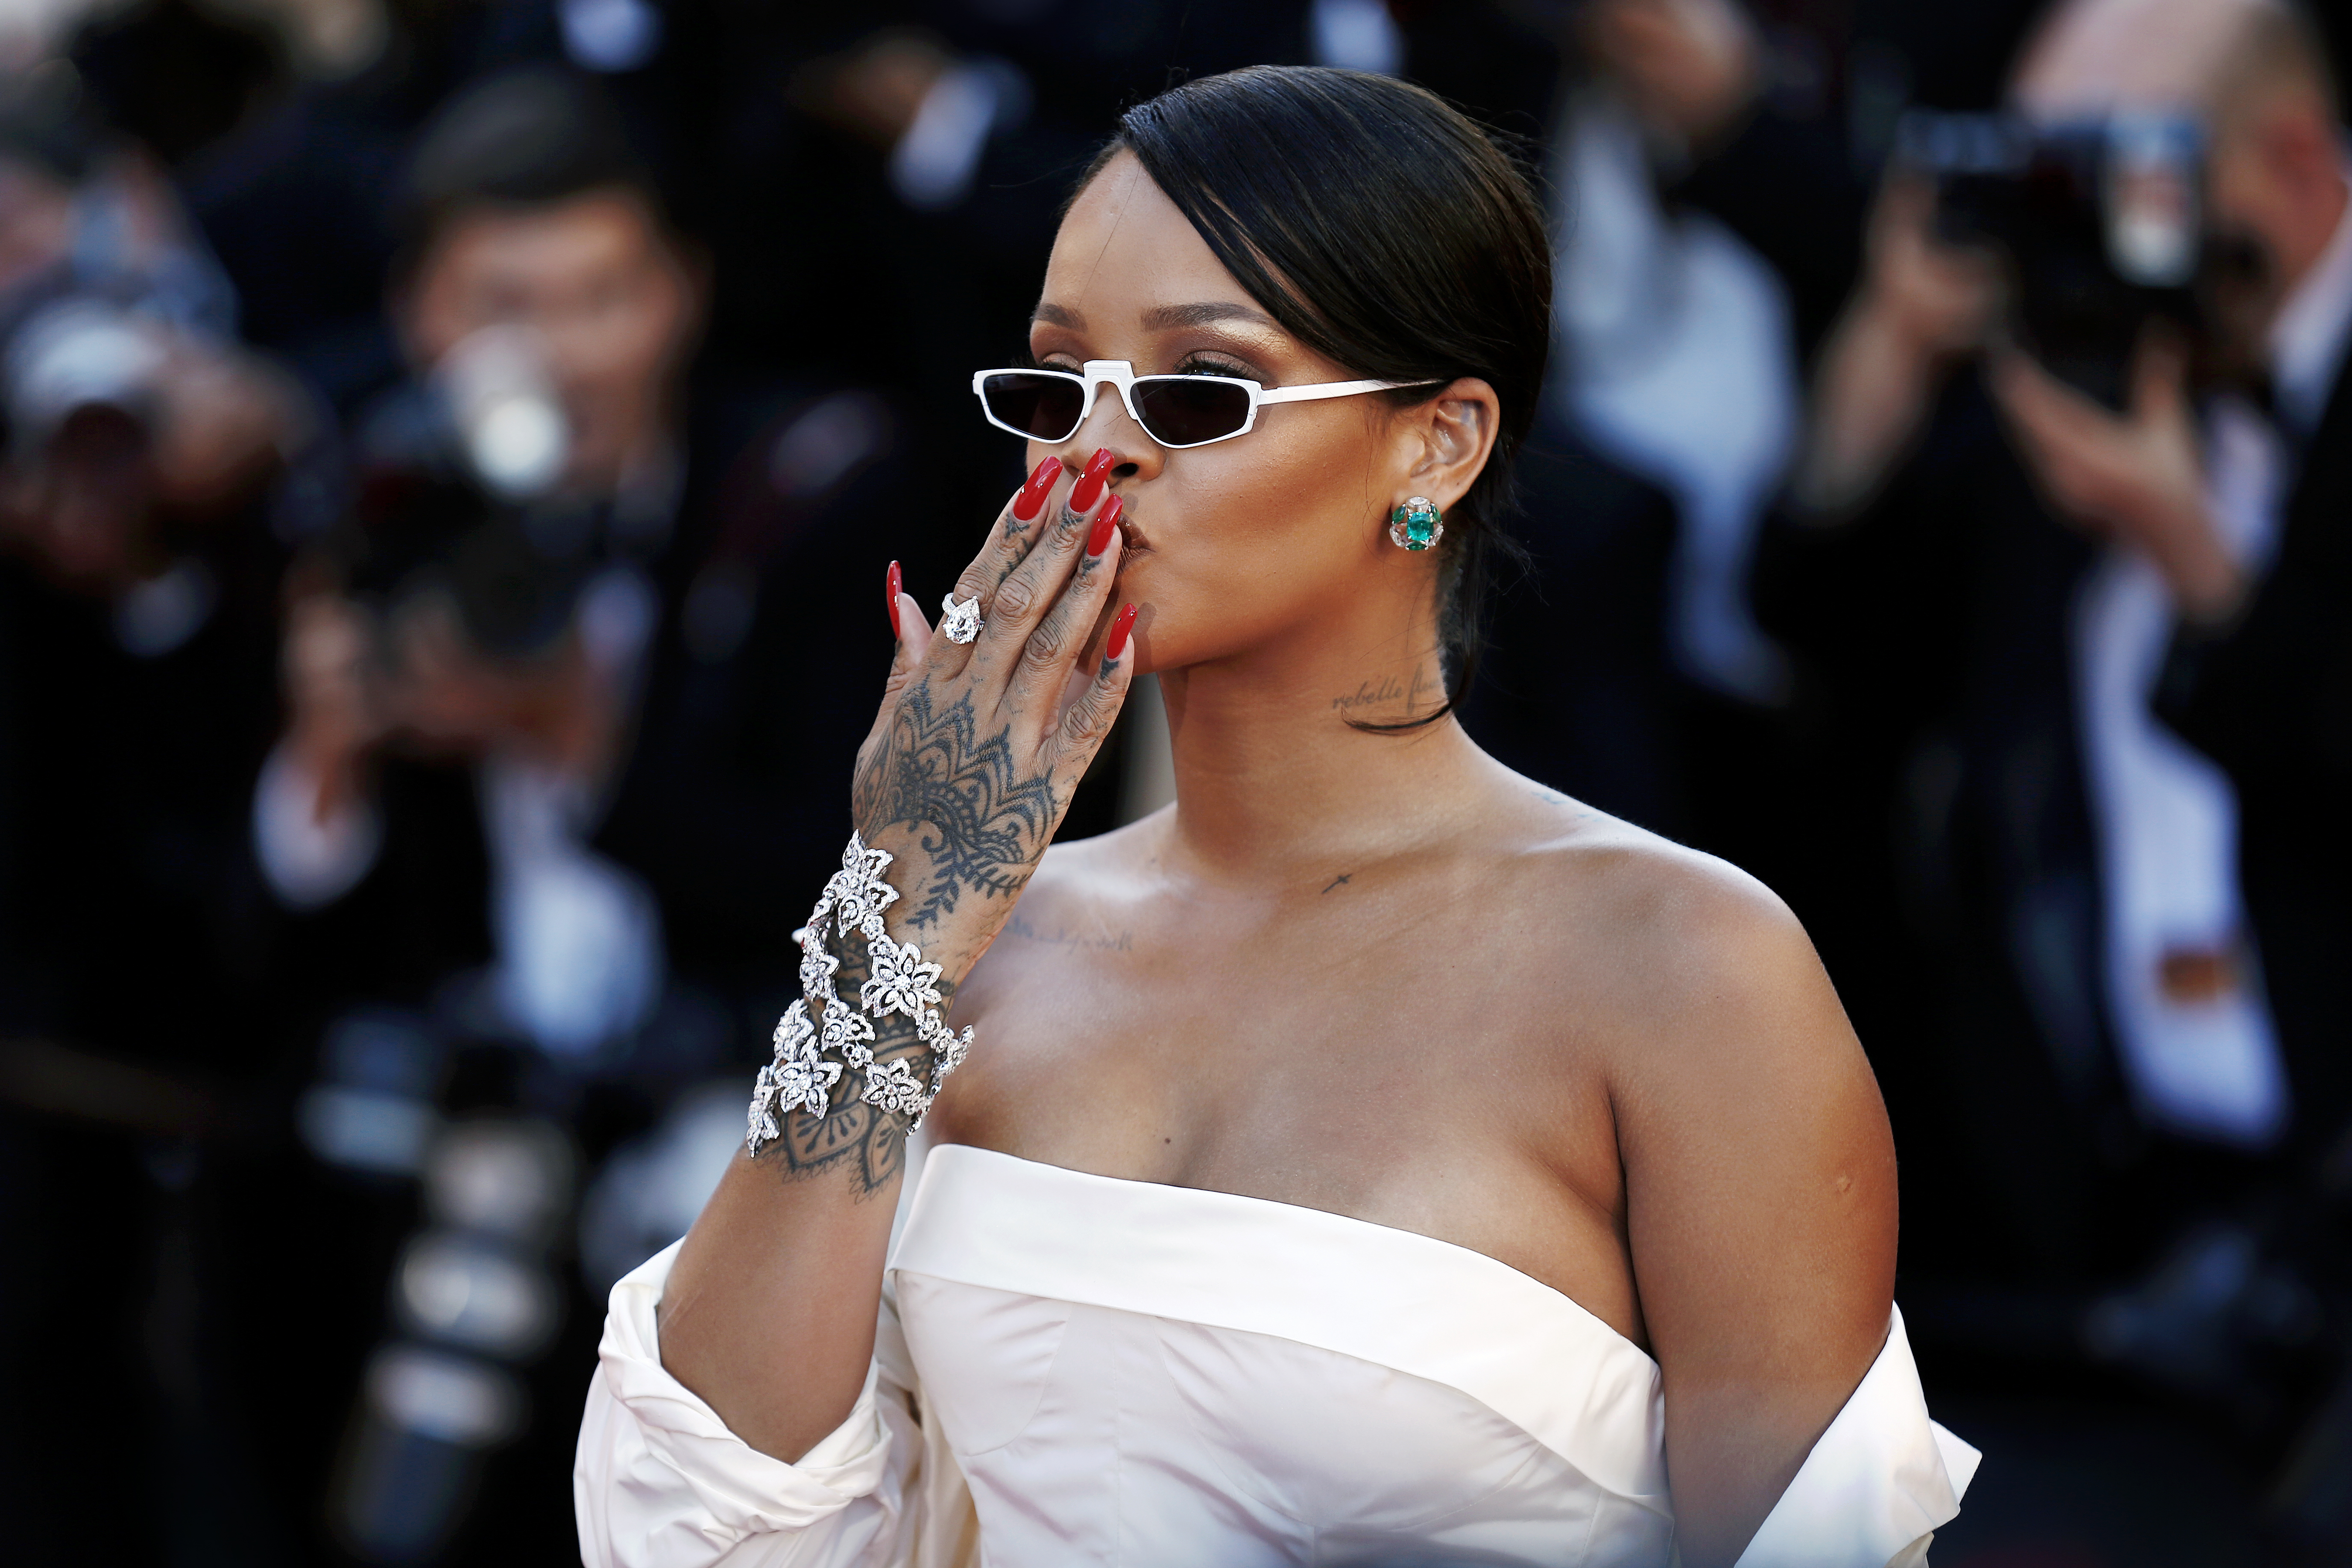 Rihanna covers up her shark tattoo that matched ex Drake's